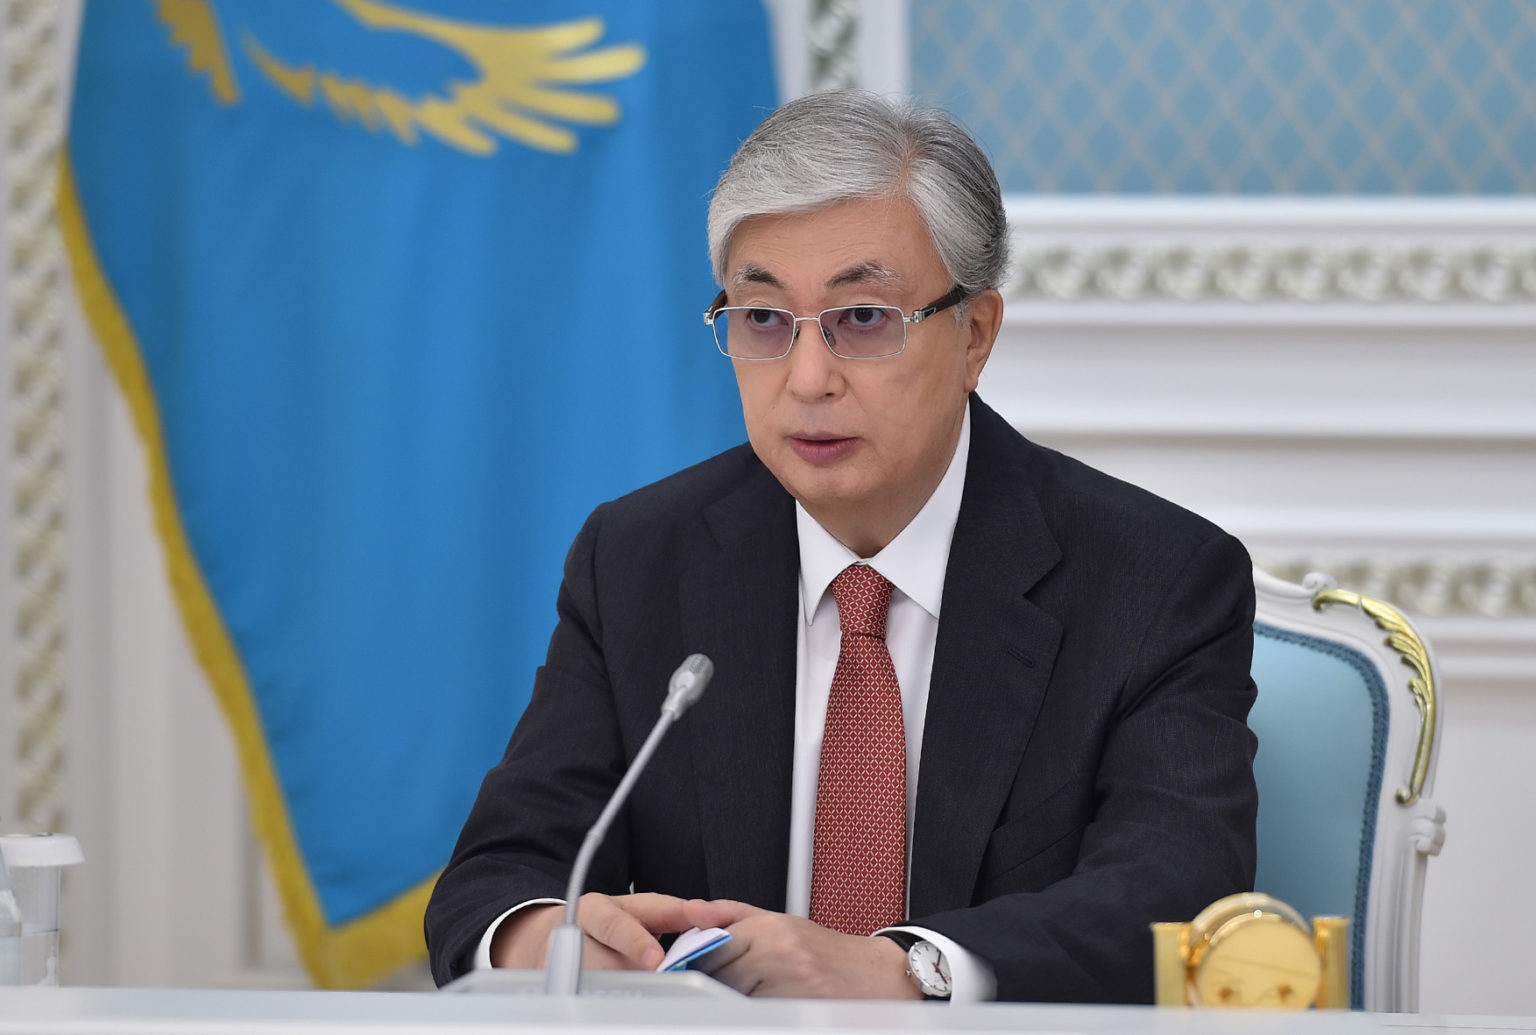 Kazakhstan Celebrates 25th Anniversary of Constitution - The Astana Times